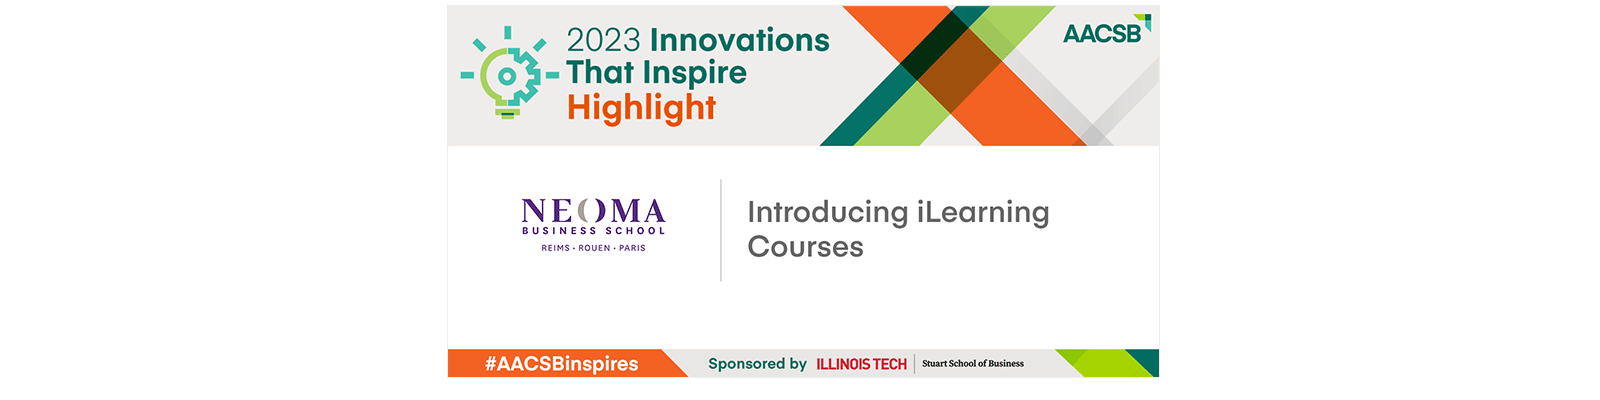 NEOMA-AACSB-Innovations-that-Inspire-2023